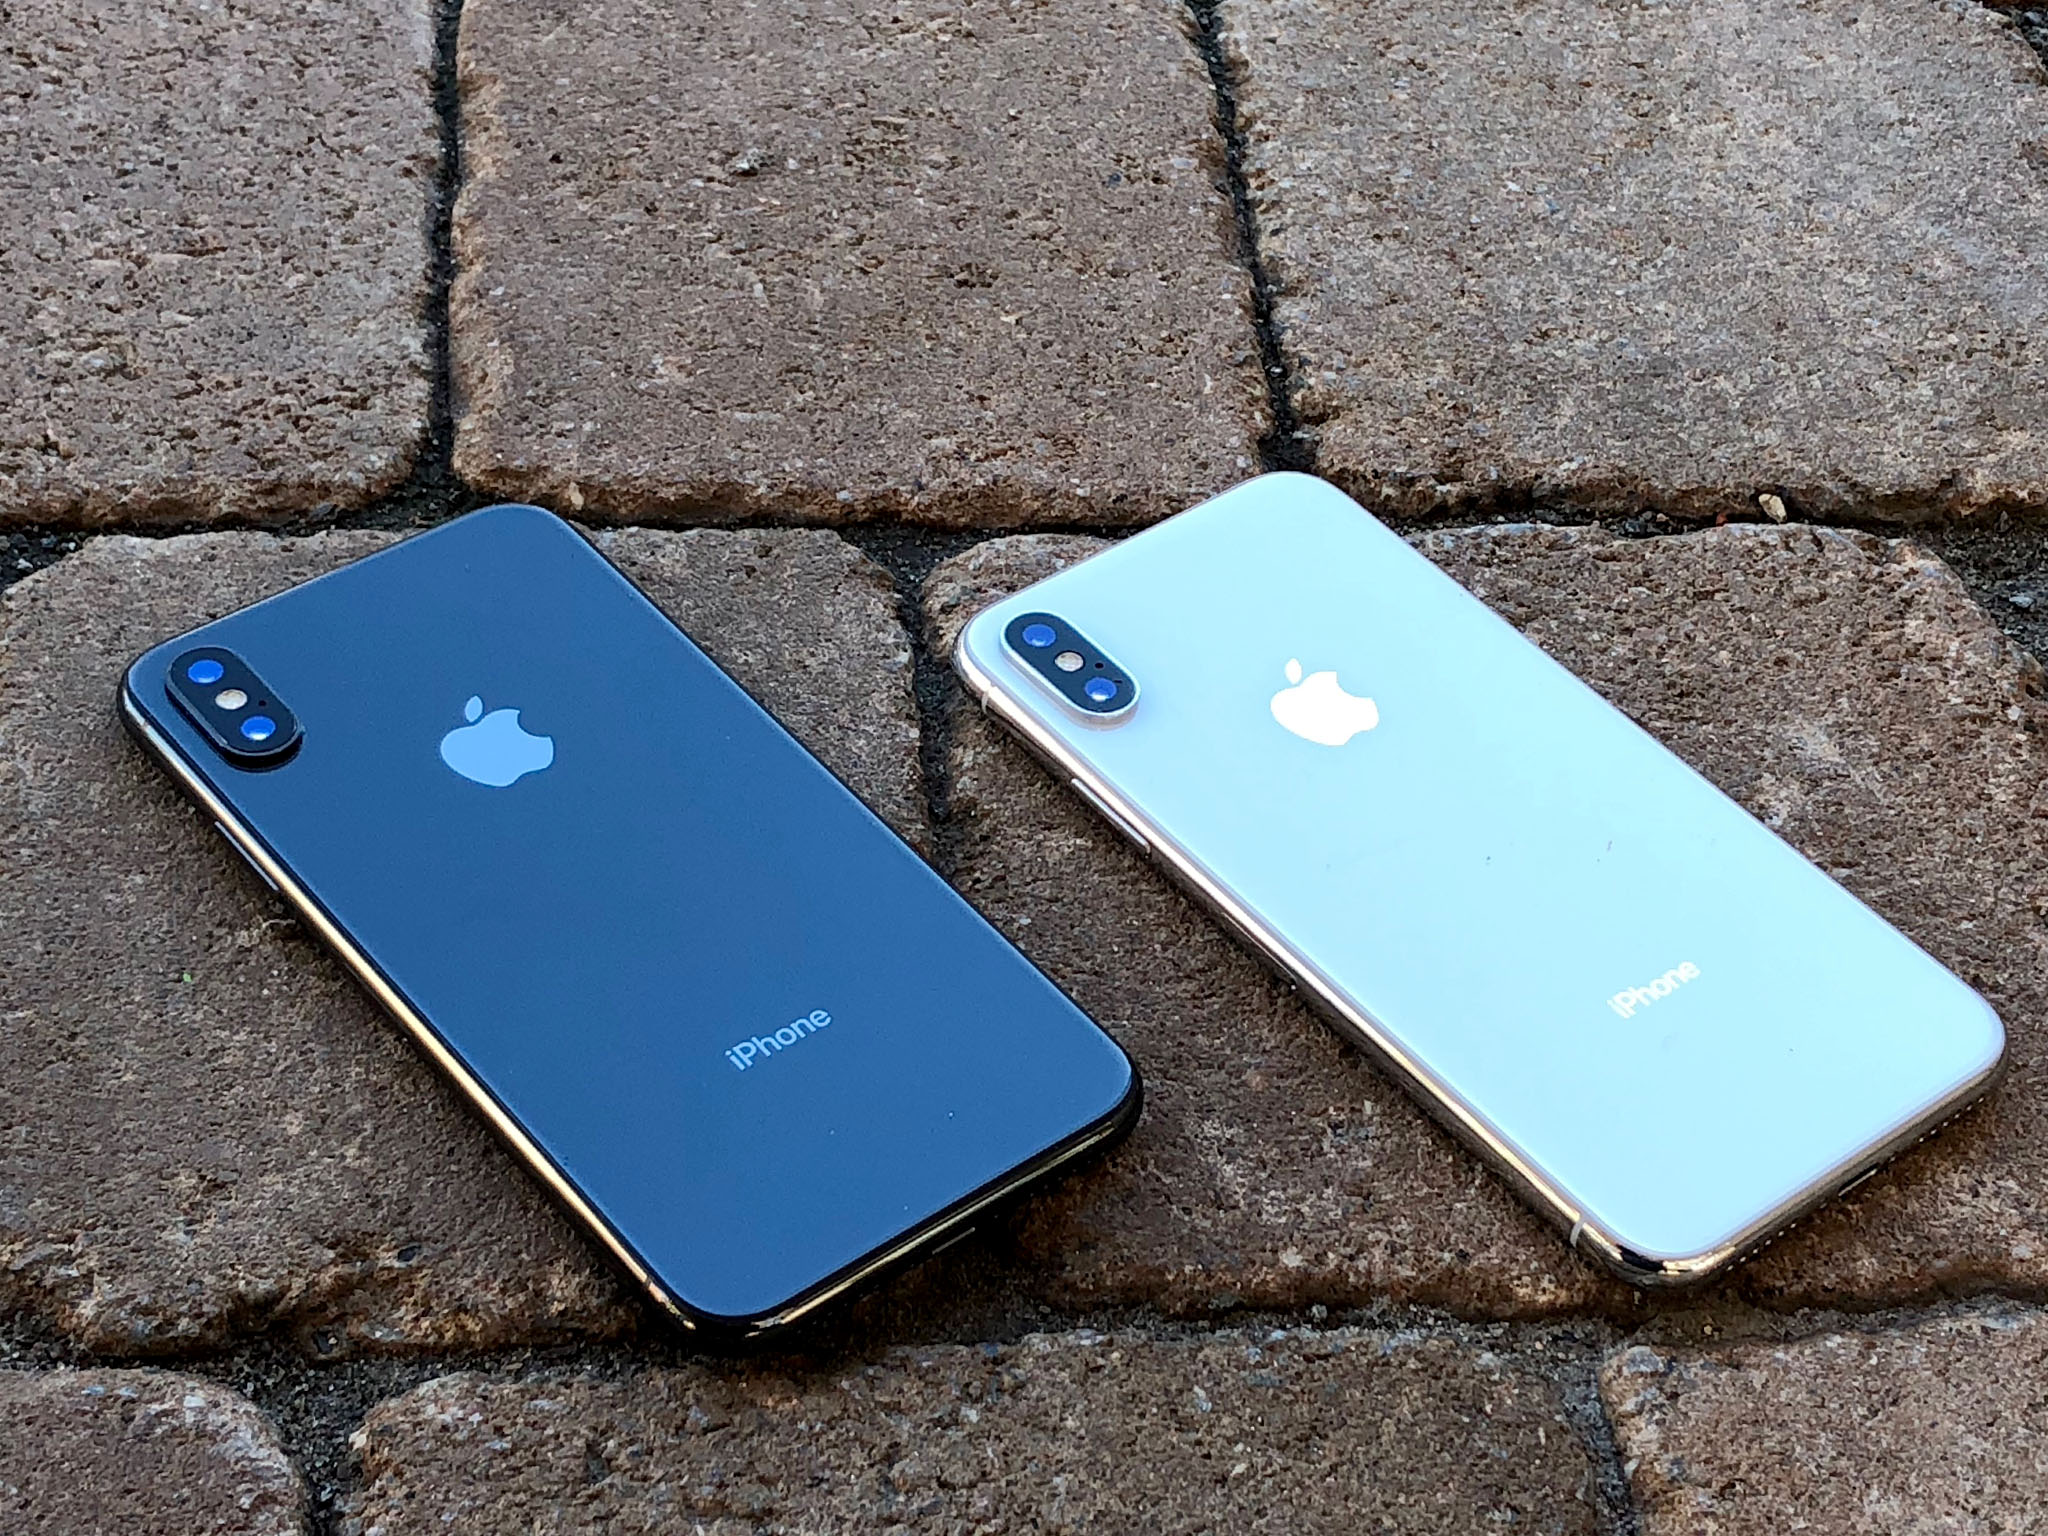 How to find the model number of your iPhone X and iPhone 8